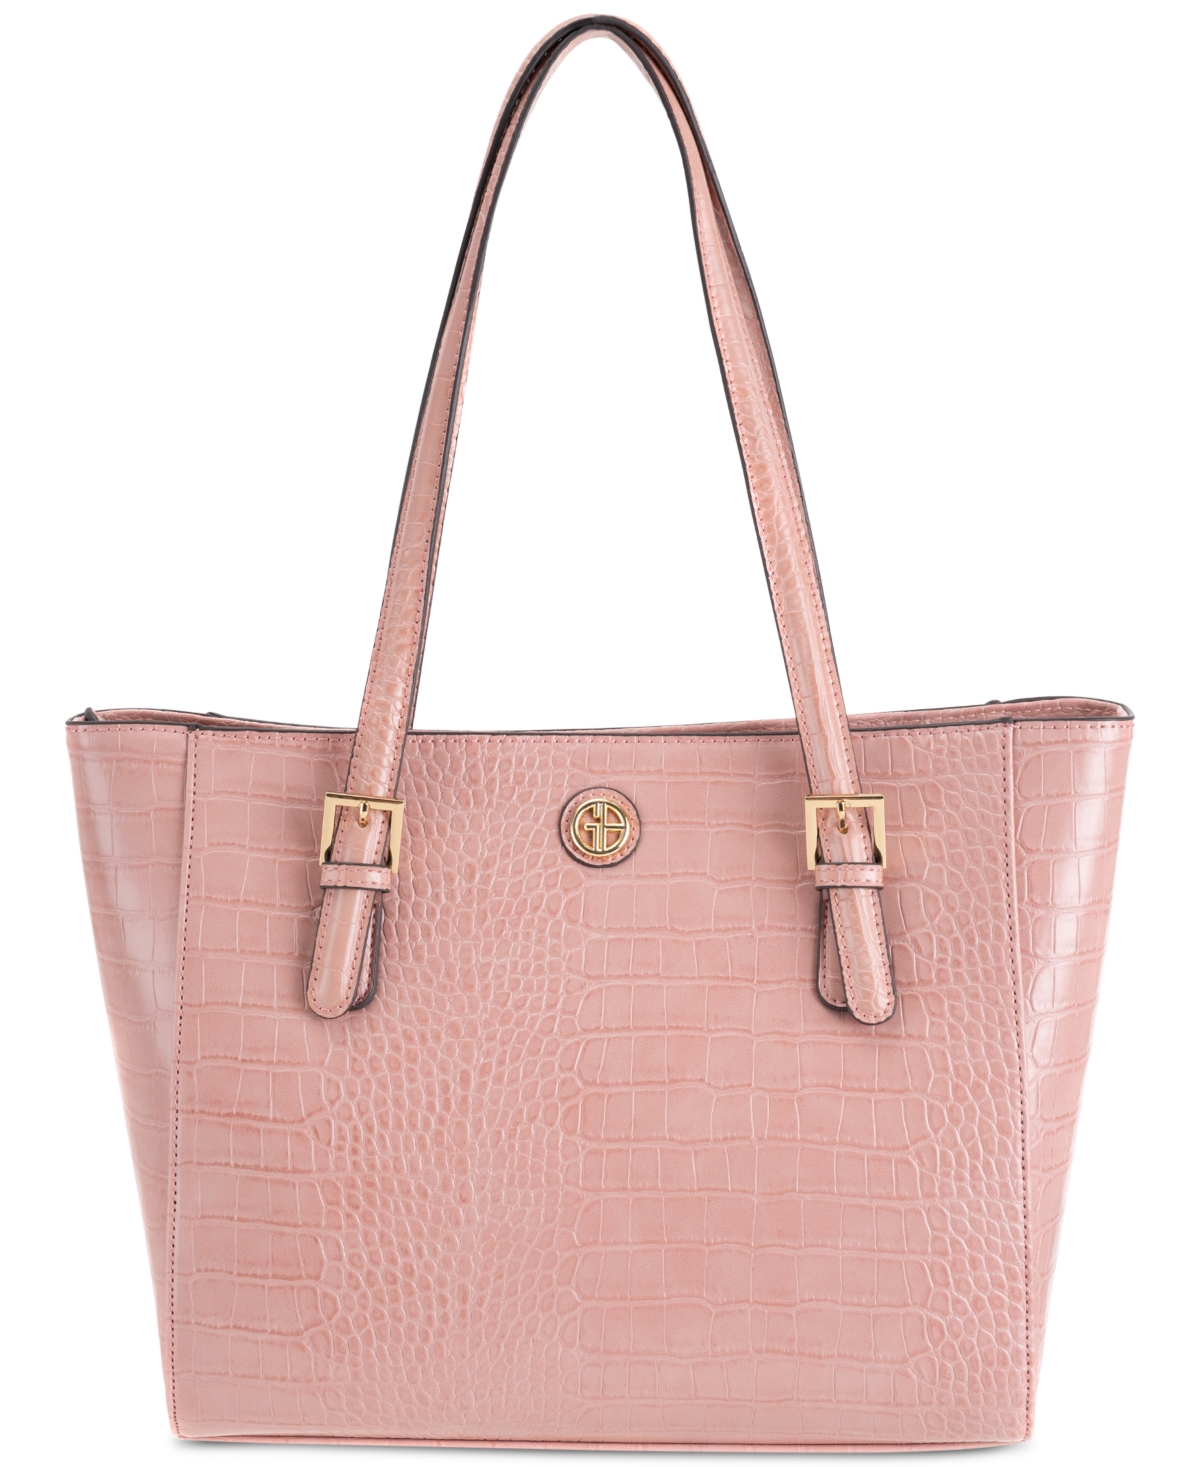 Croc-Embossed Tote, Created for Macy's - Dusty Pink